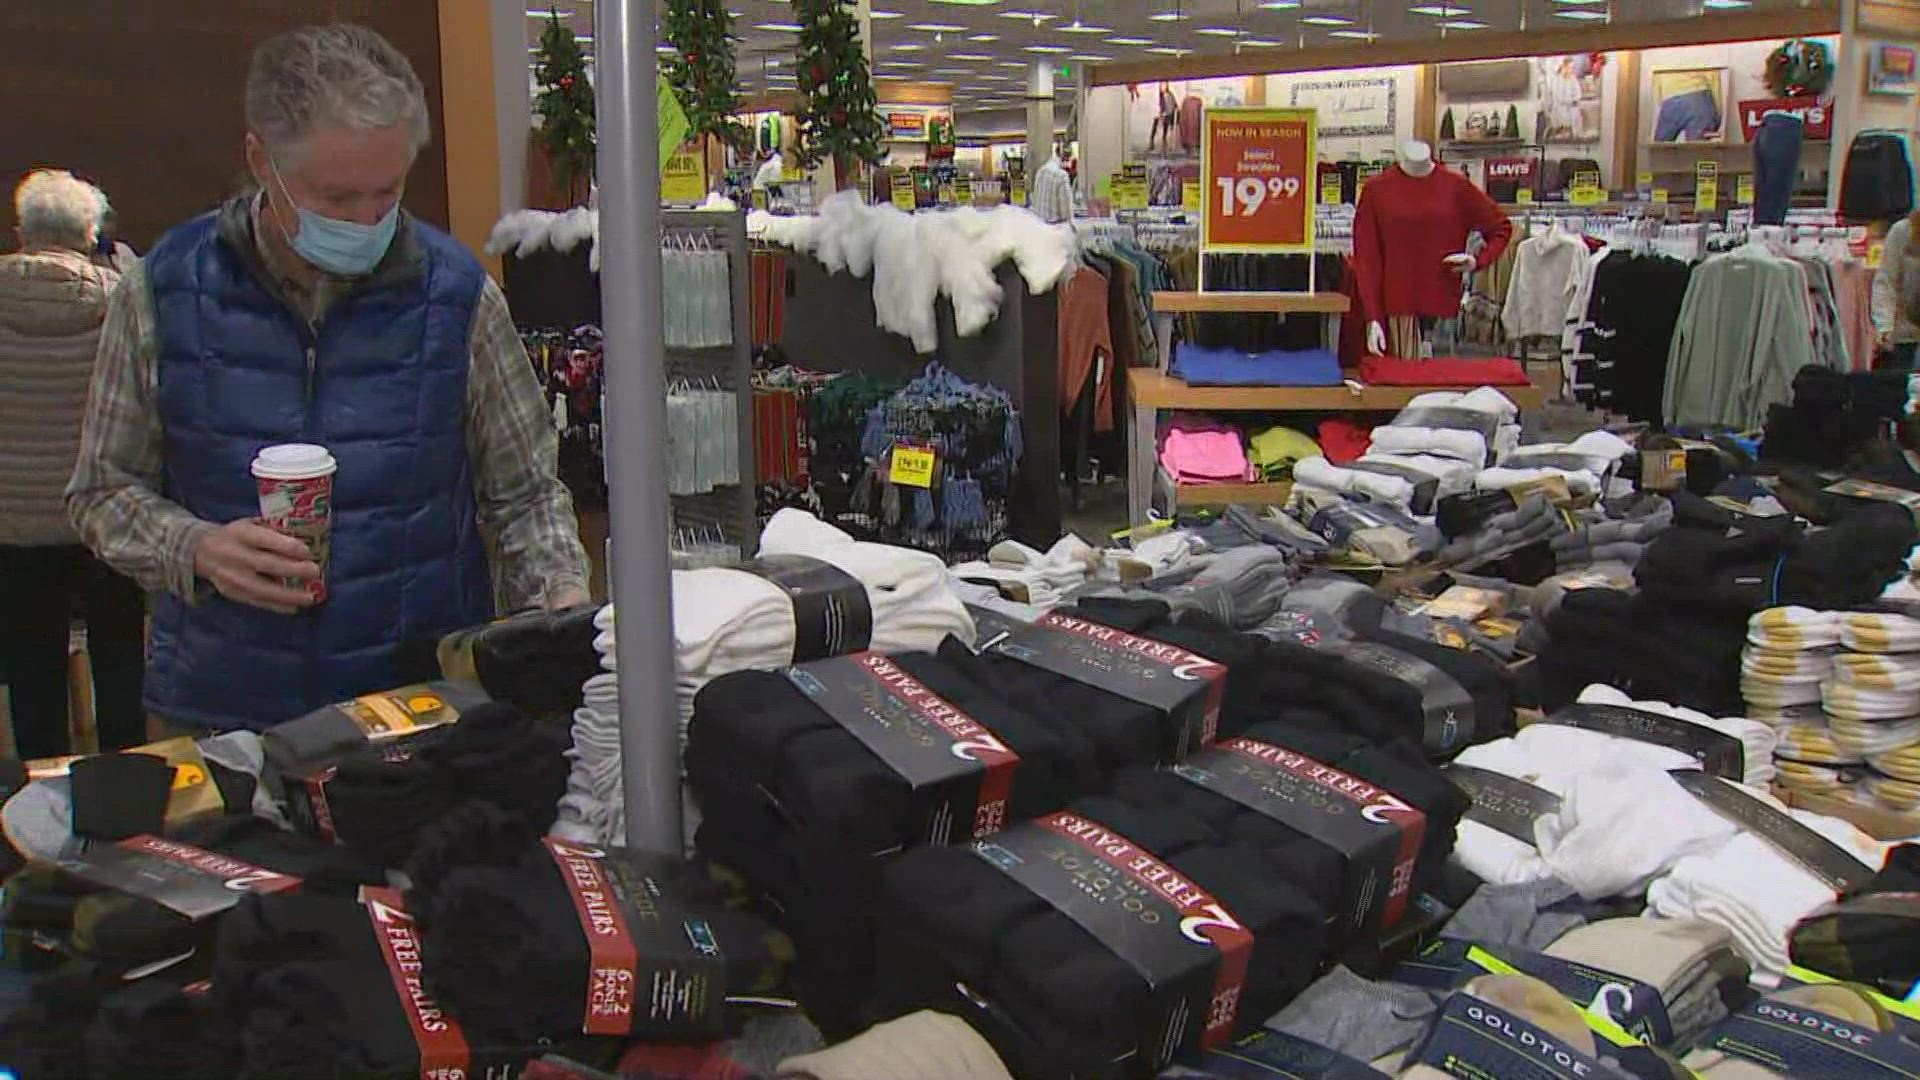 The retail federation estimates 158 million shoppers will buy between Friday and Monday after Thanksgiving.